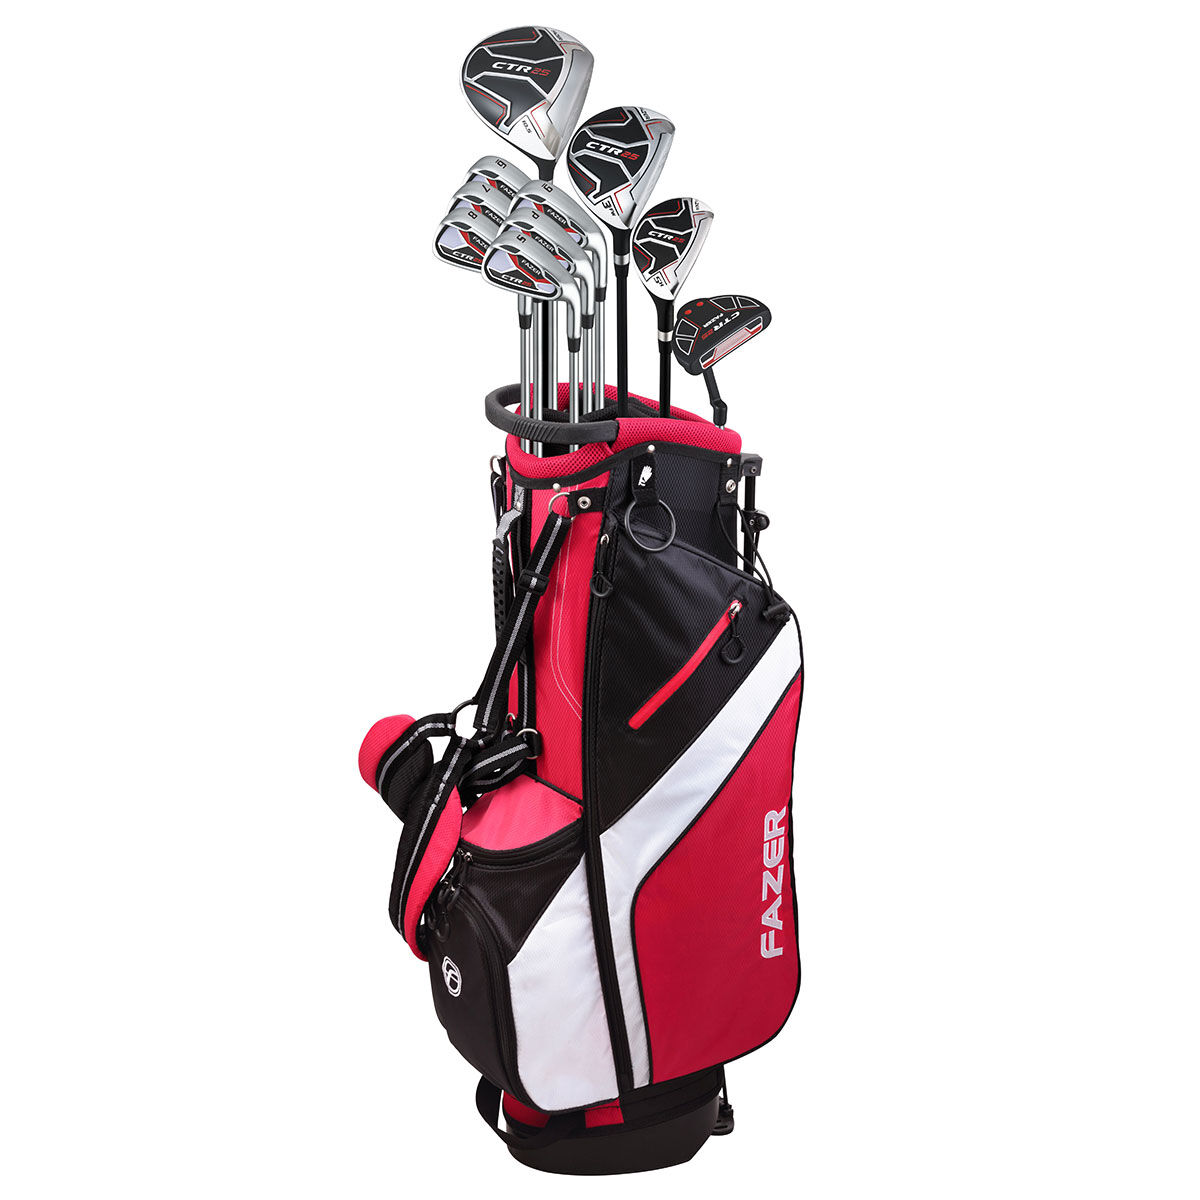 Fazer Mens, Red, Black, Silver Ctr25 Graphite Complete Golf Package Set, Size: Left Hand | American Golf